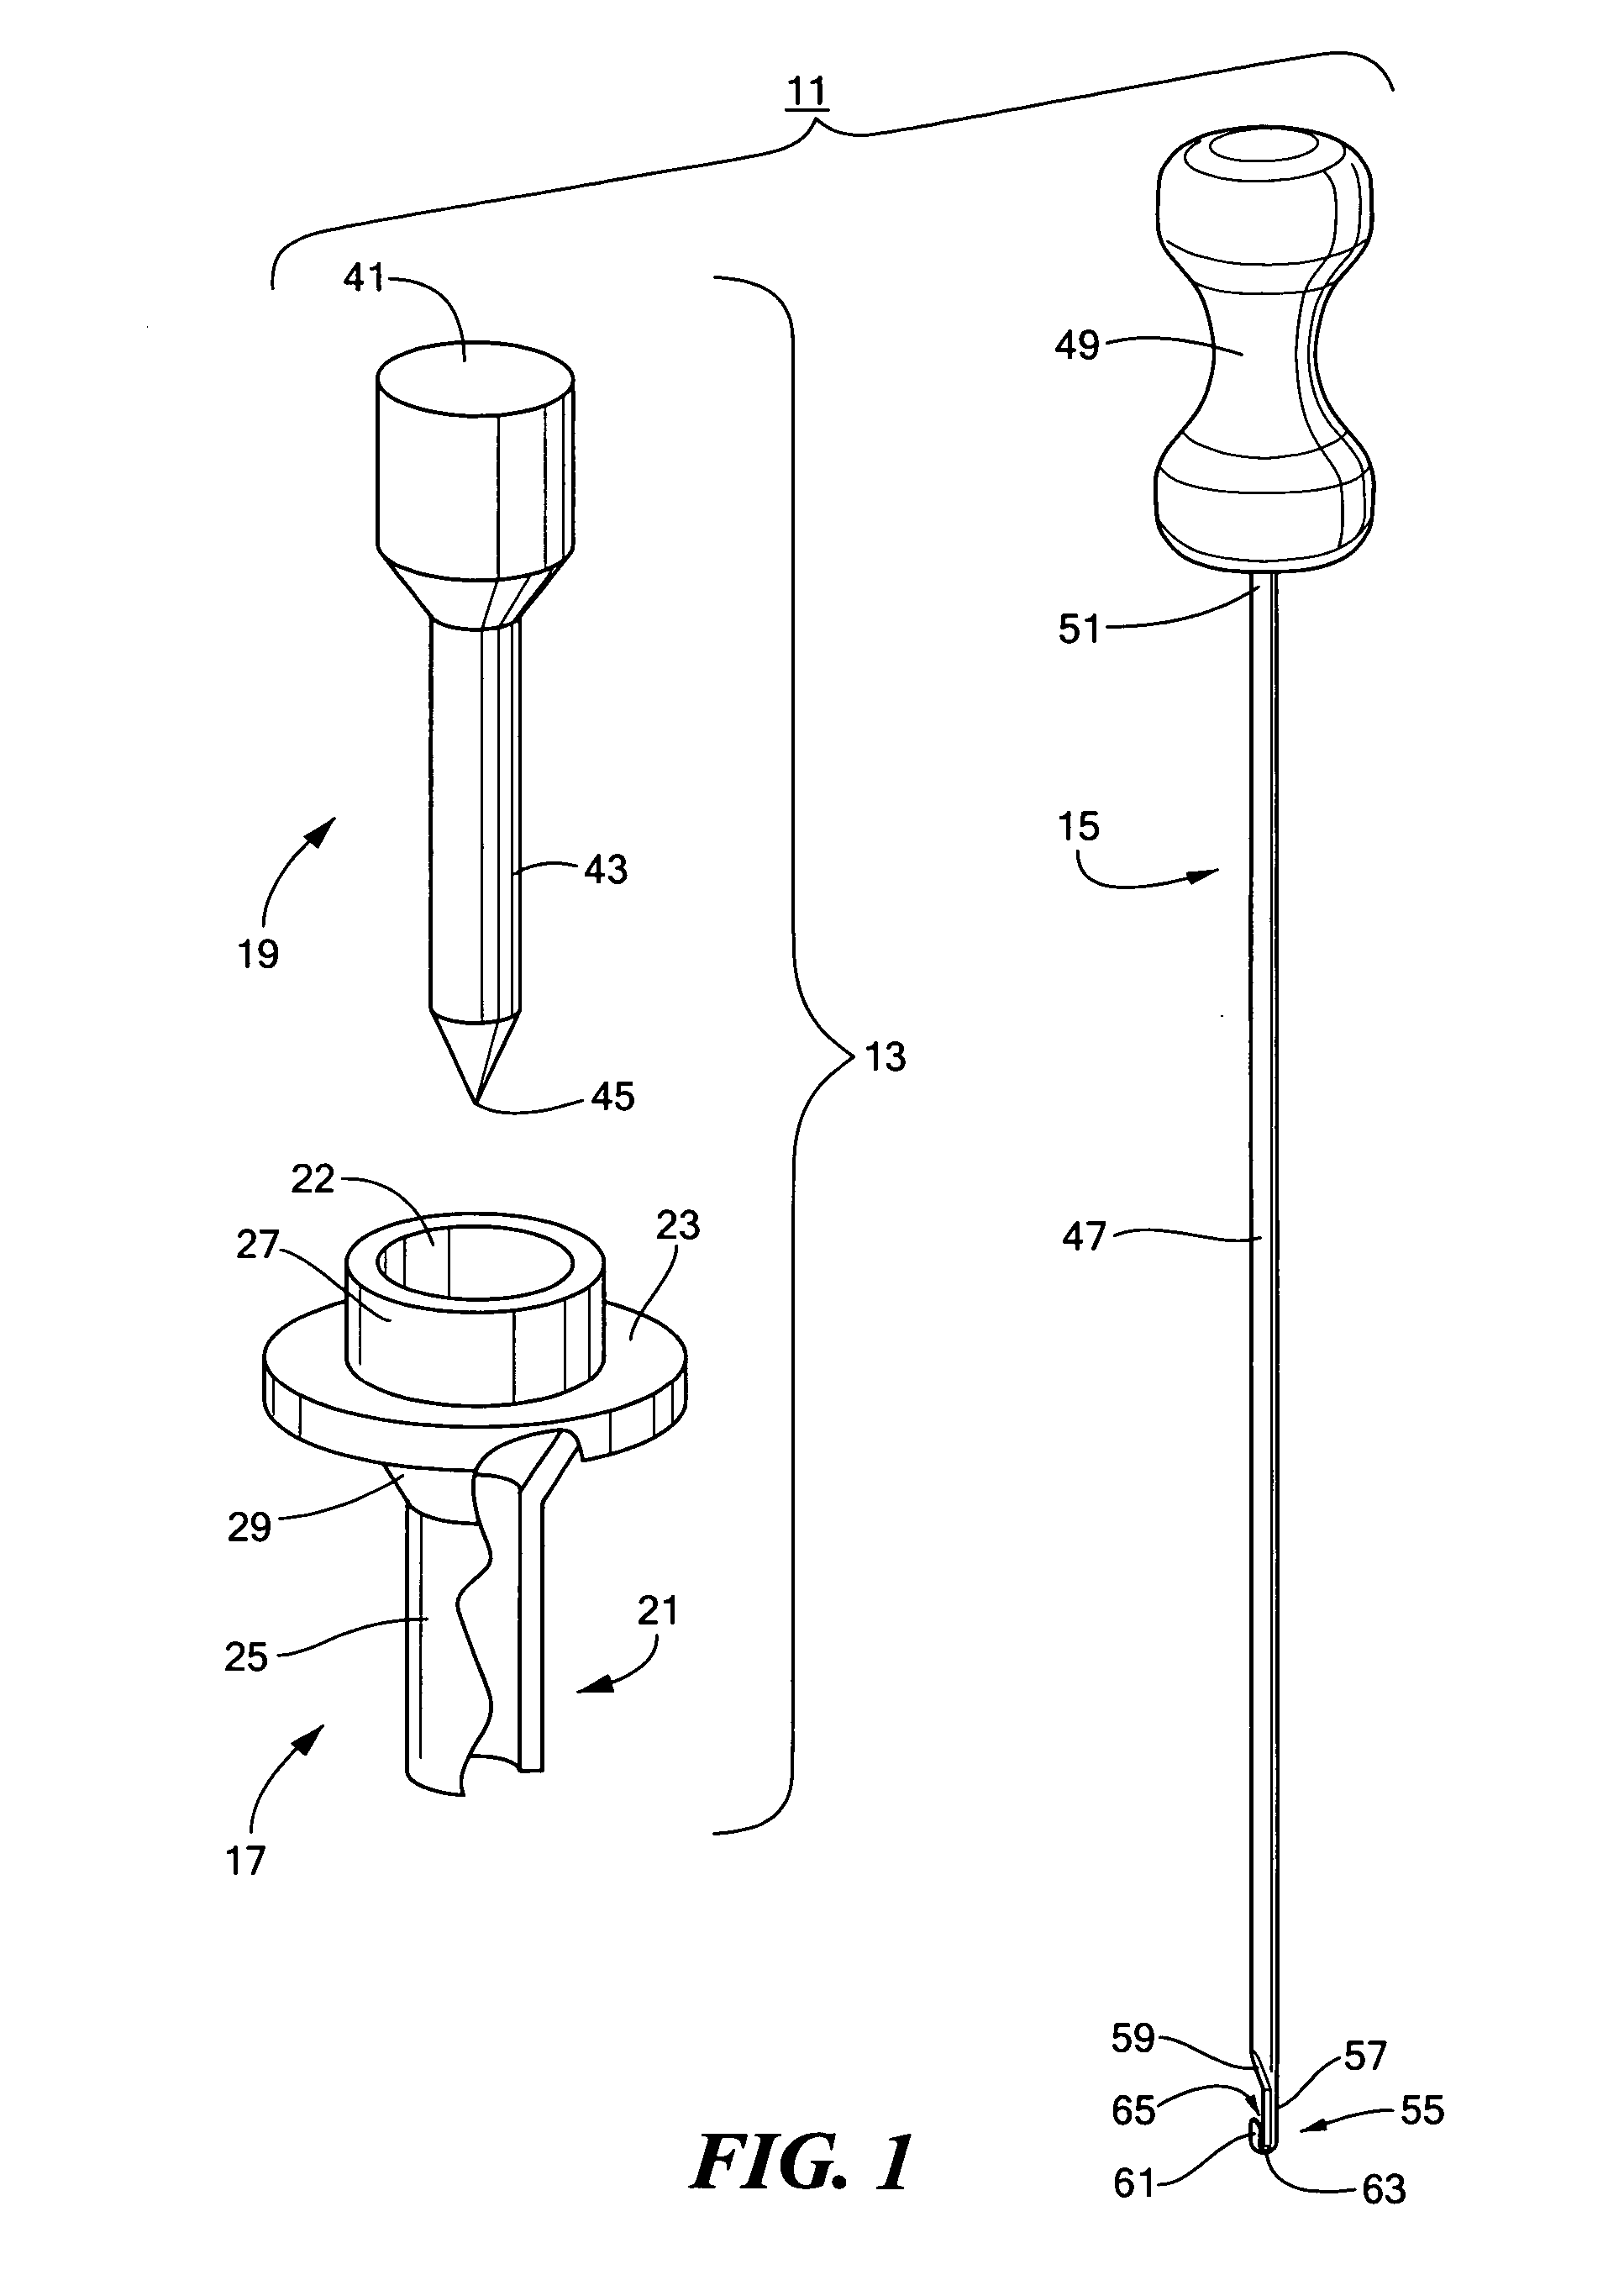 Method for positioning a catheter guide element in a patient and kit for use in said method